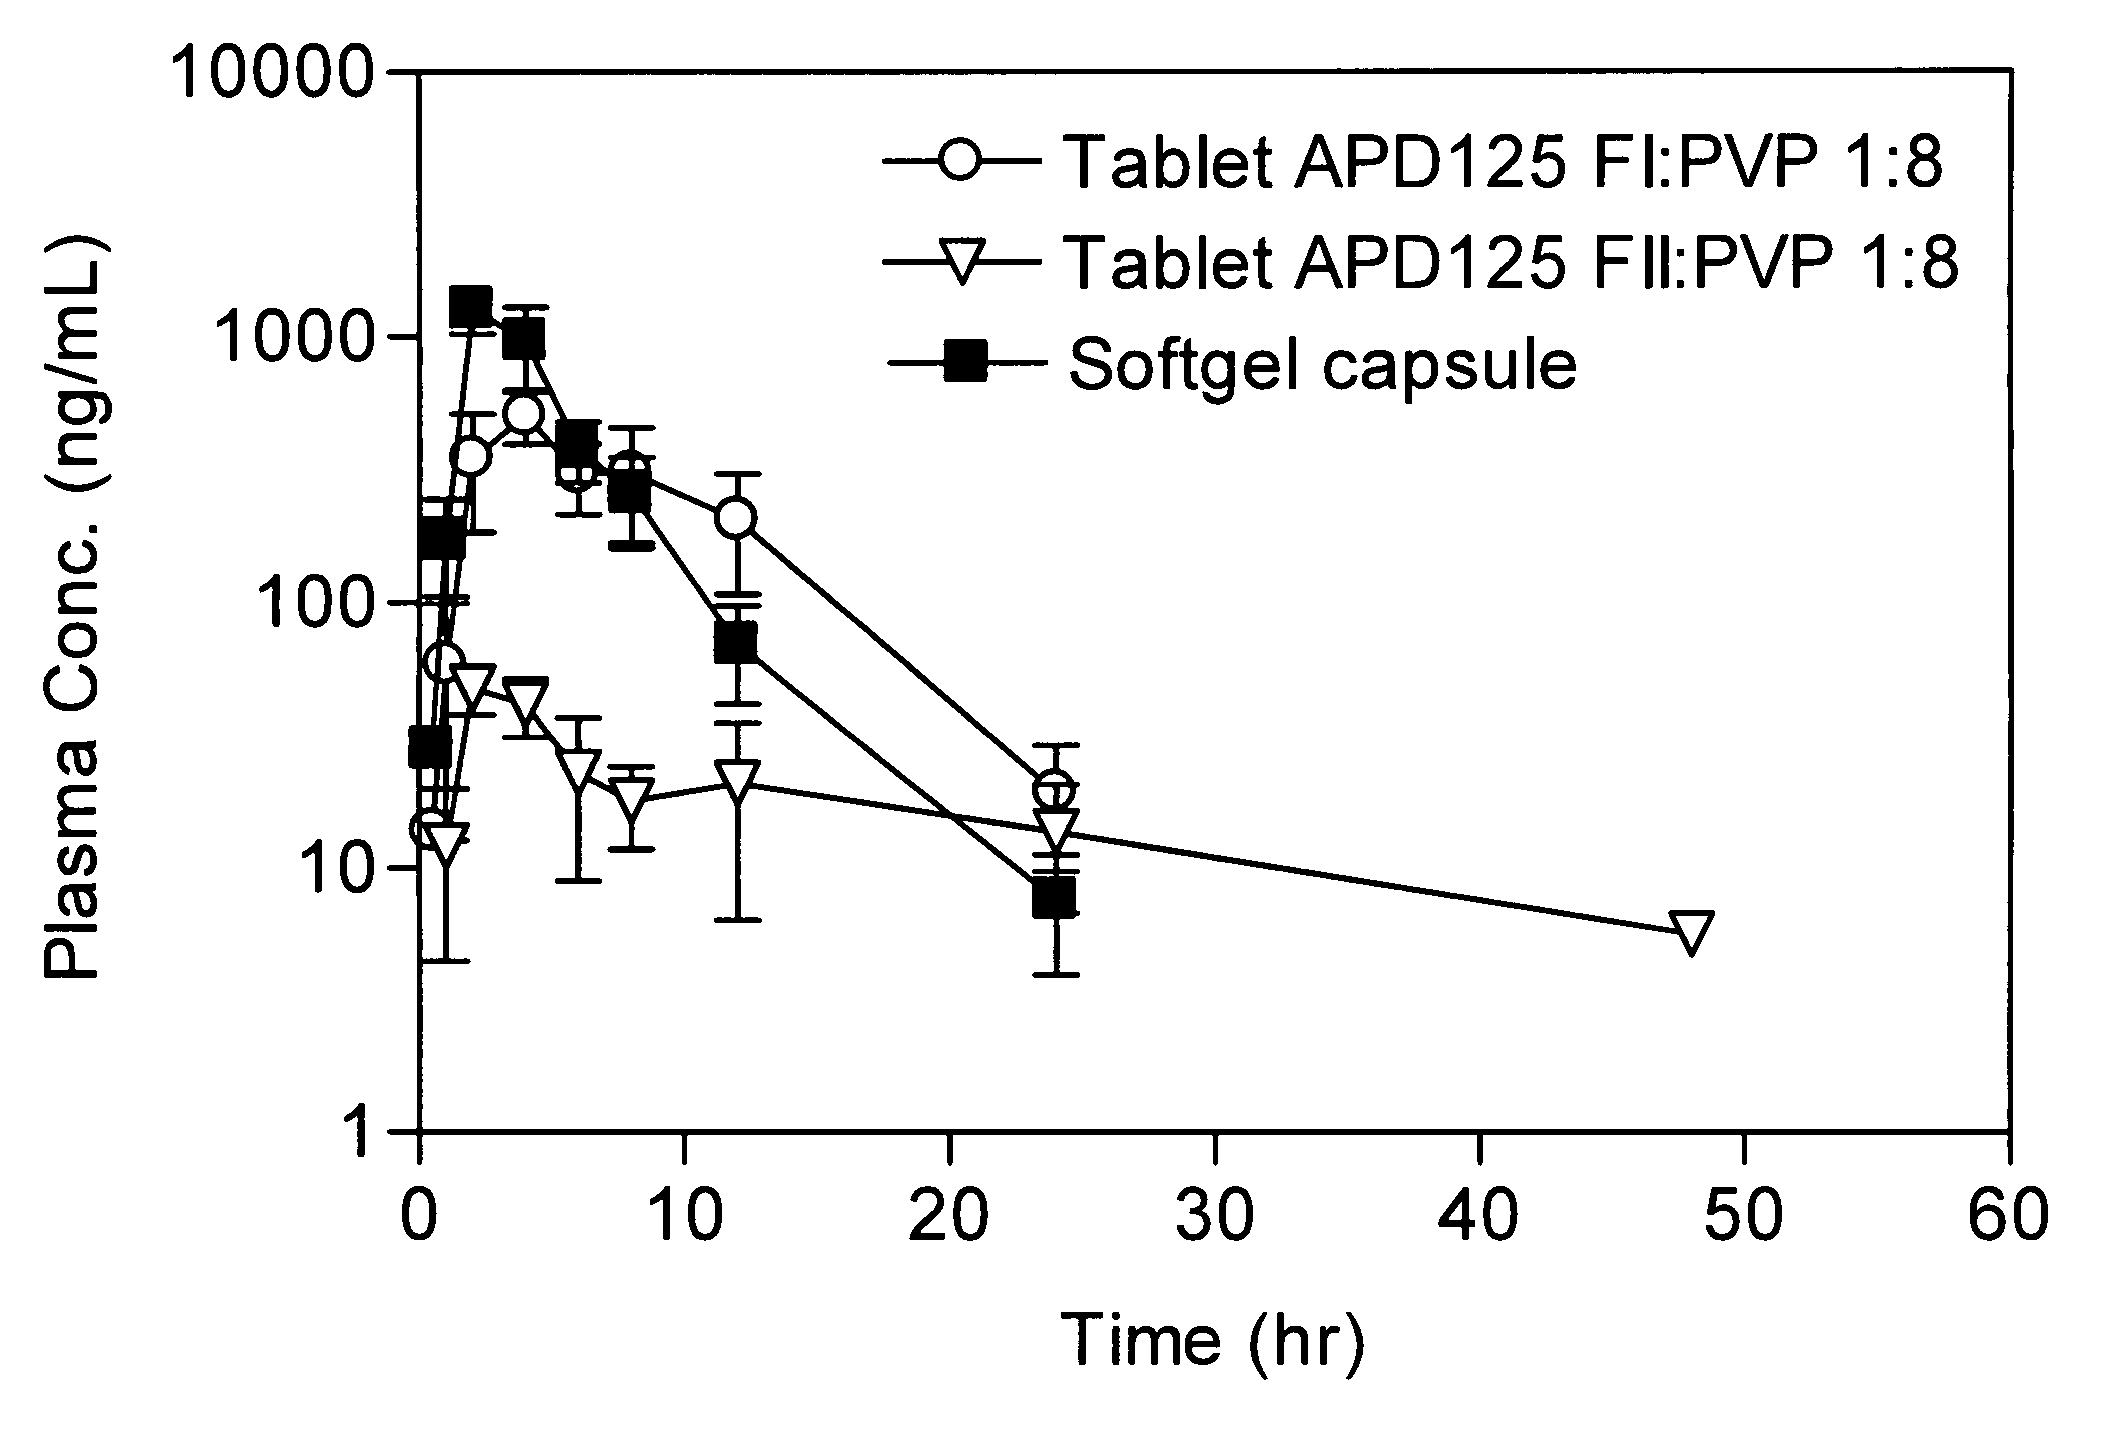 Composition of a 5-ht2a serotonin receptor modulator useful for the treatment of disorders related thereto